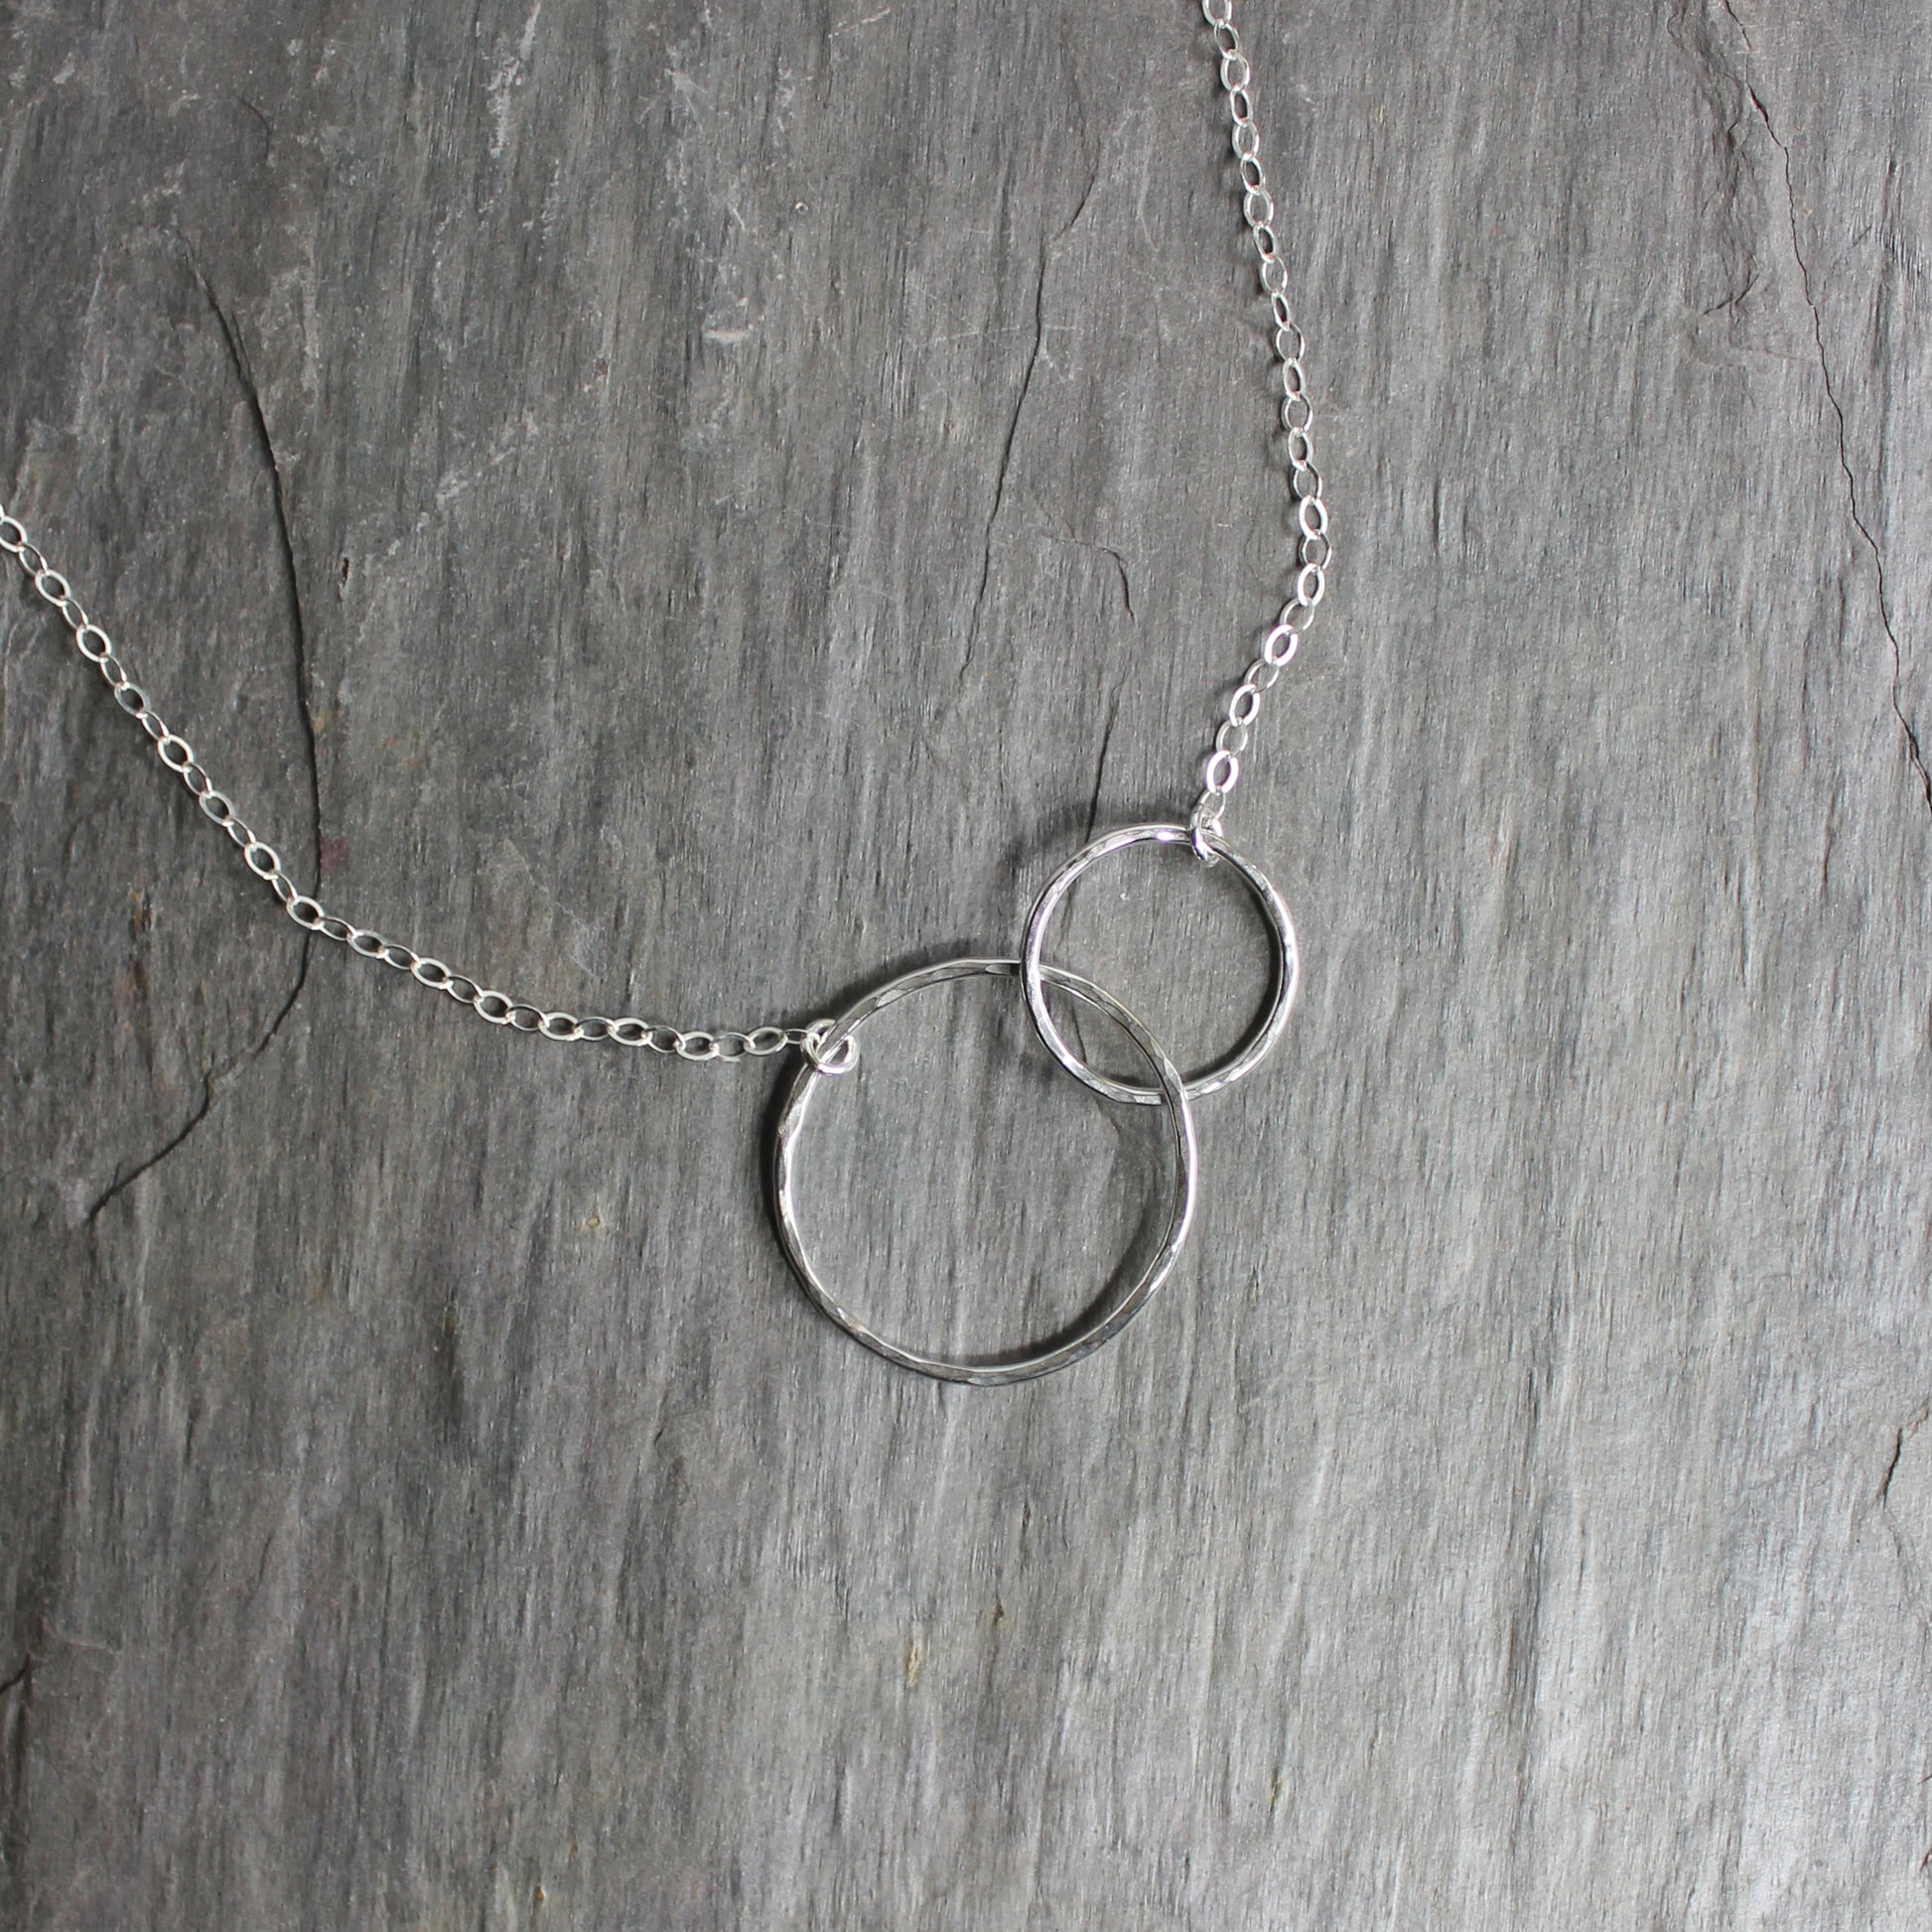 A one inch hammered circle and a 1/2 inch hammered circle interlocking and attached to sterling silver chain to make a elegant necklace.